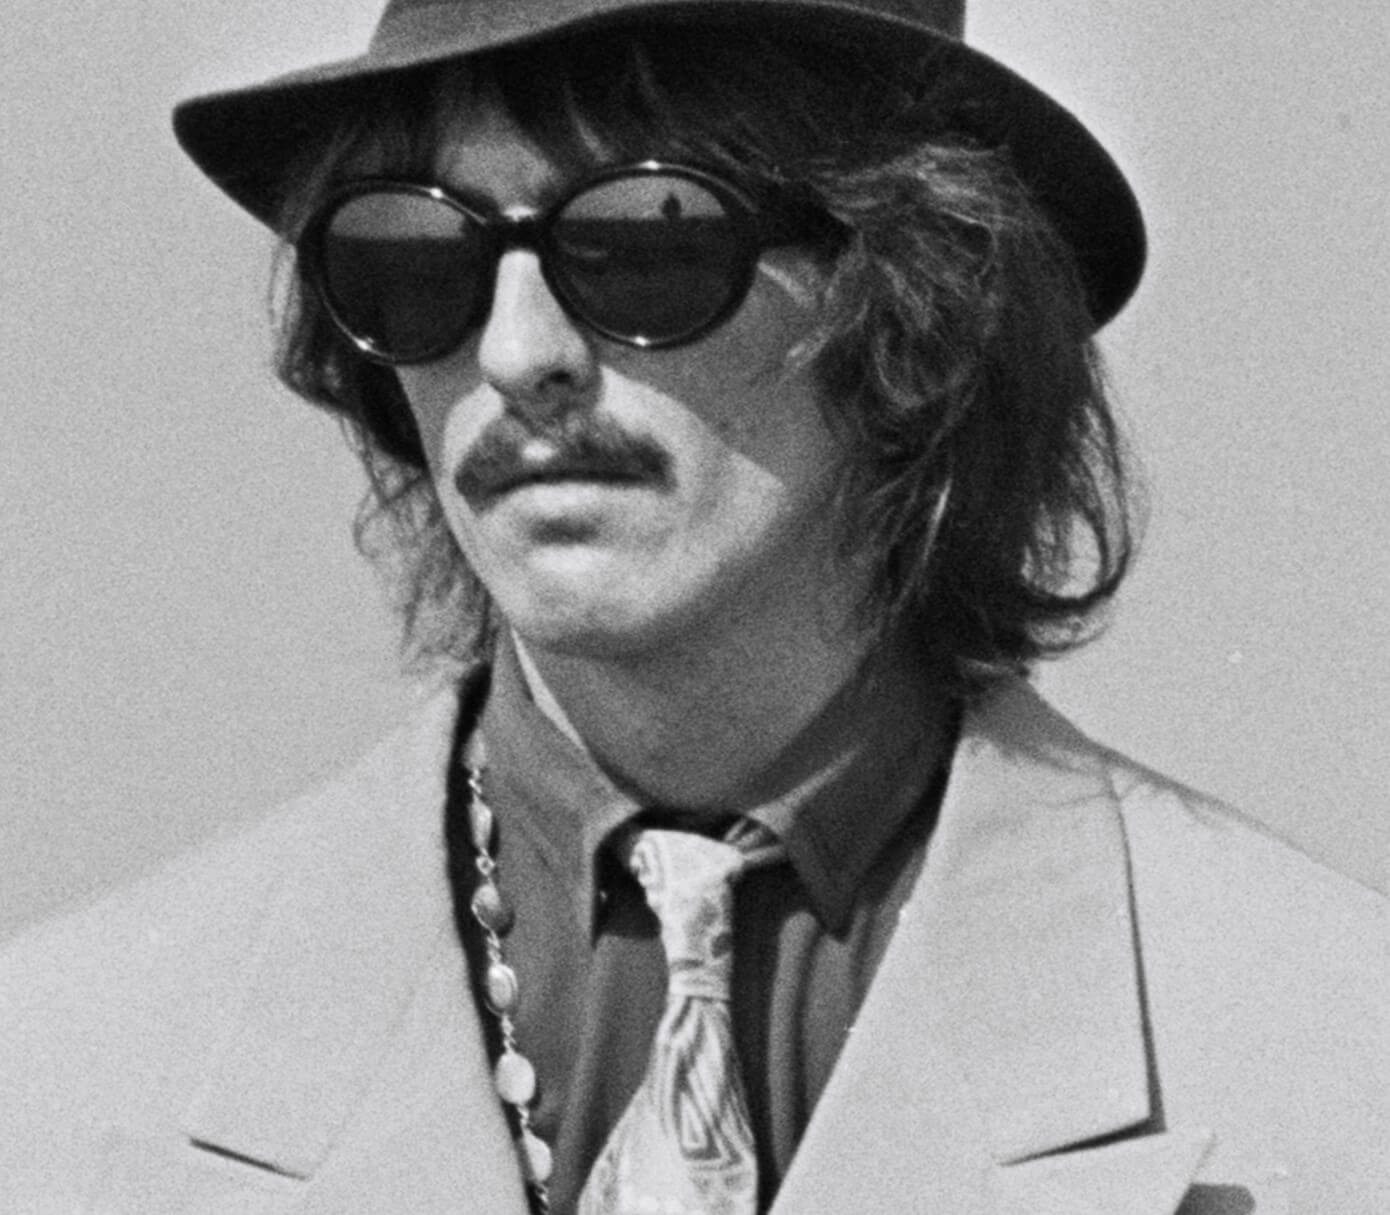 The Beatles' George Harrison wearing a hat